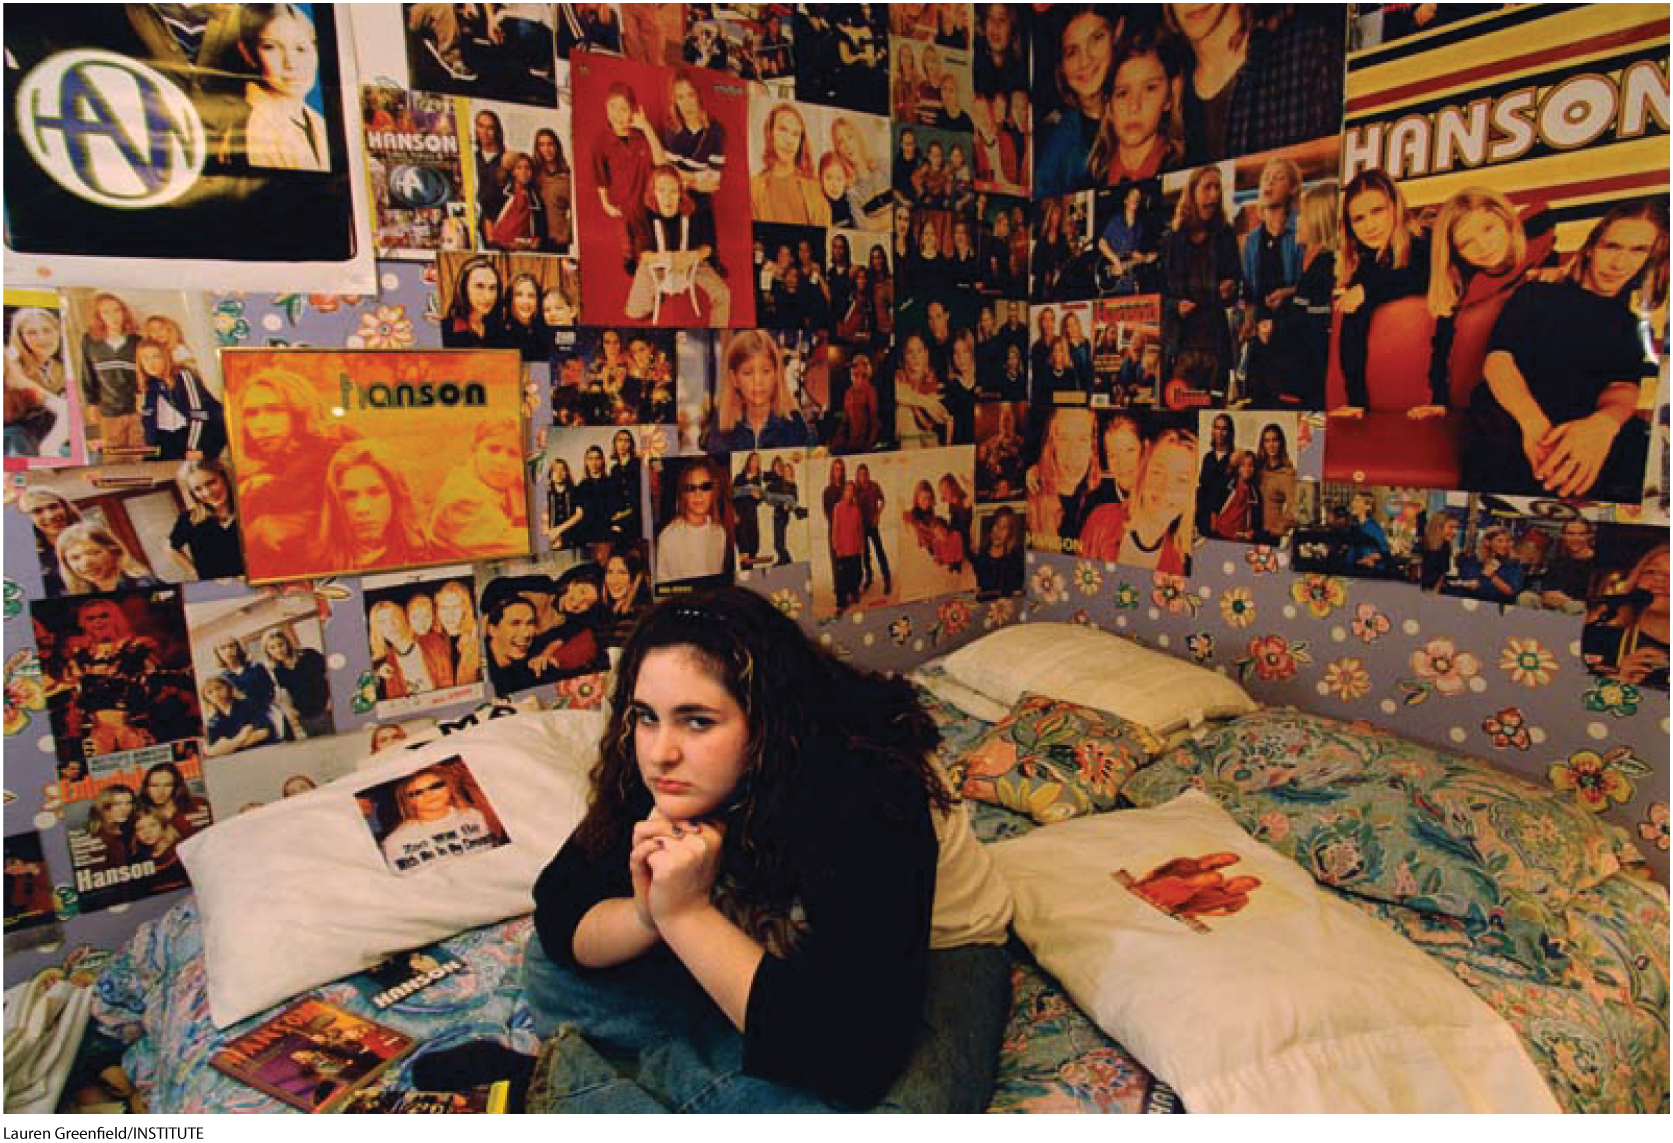 A photo shows a teenage girl sitting in her bedroom; the room’s walls are covered with posters of various music bands.